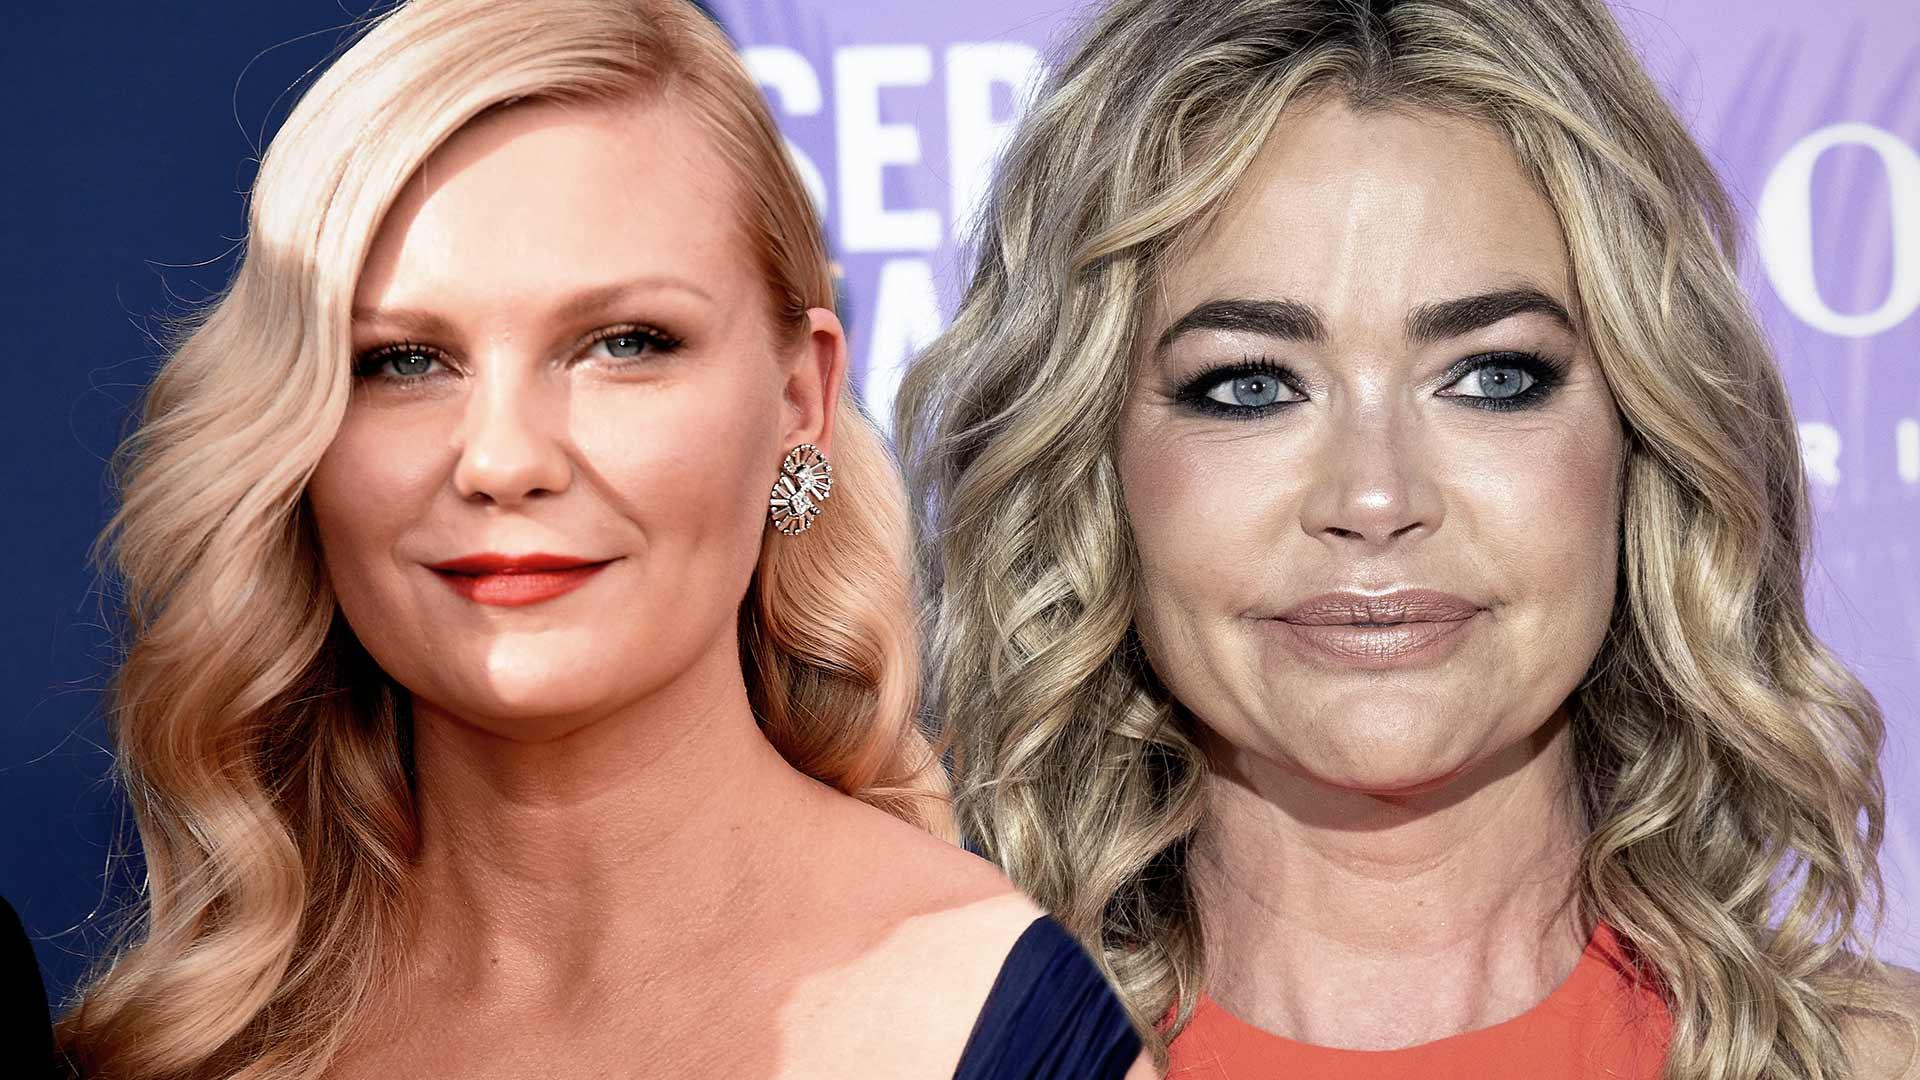 ‘RHOBH’ Star Denise Richards and Kirsten Dunst’s ‘Drop Dead Gorgeous’ Celebrates 20th Anniversary